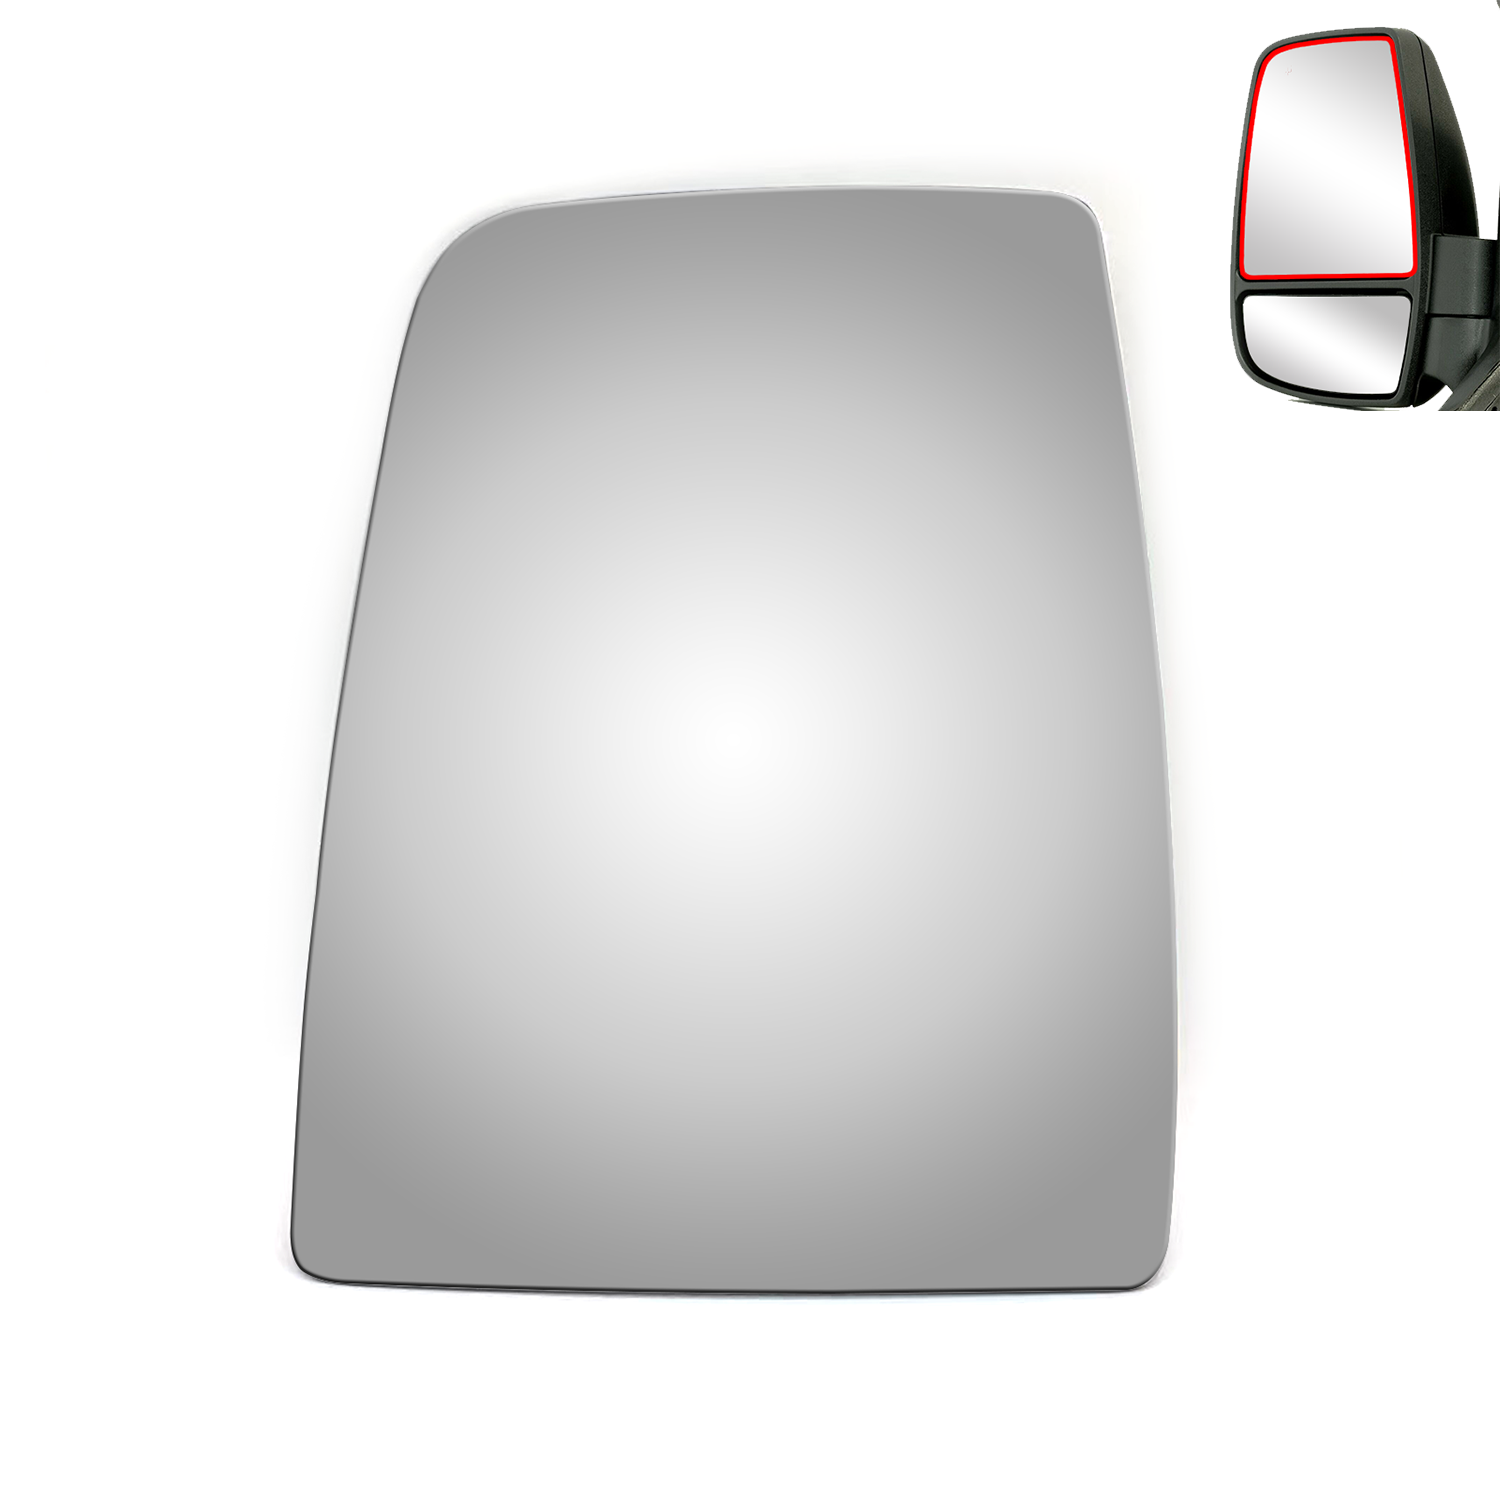 WLLW Upper Mirror Glass Replacement for 2015-2021 Ford Transit 150/250/350/350 HD, 2022-2023 E-TRANSIT, Driver Left Side LH/Passenger Right Side RH/The Both Sides Flat Convex M-0070